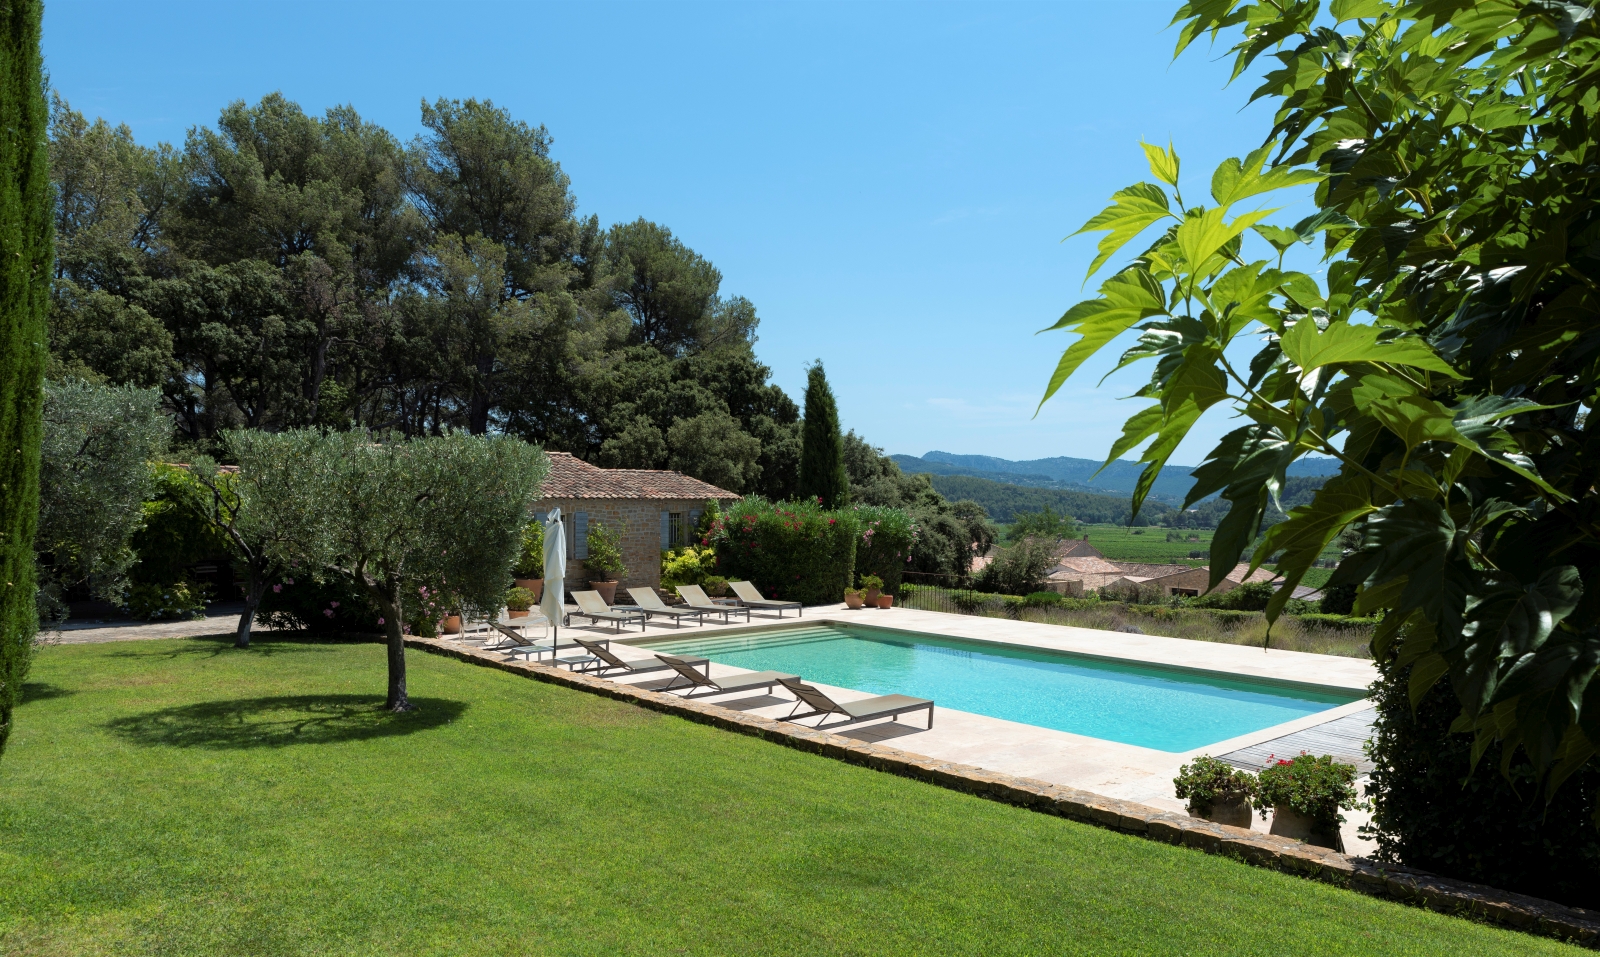 Garden, pool and pool area with sun loungers, umbrellas, plants and countryside view at La Cadiere on the Cote d’Azur, France